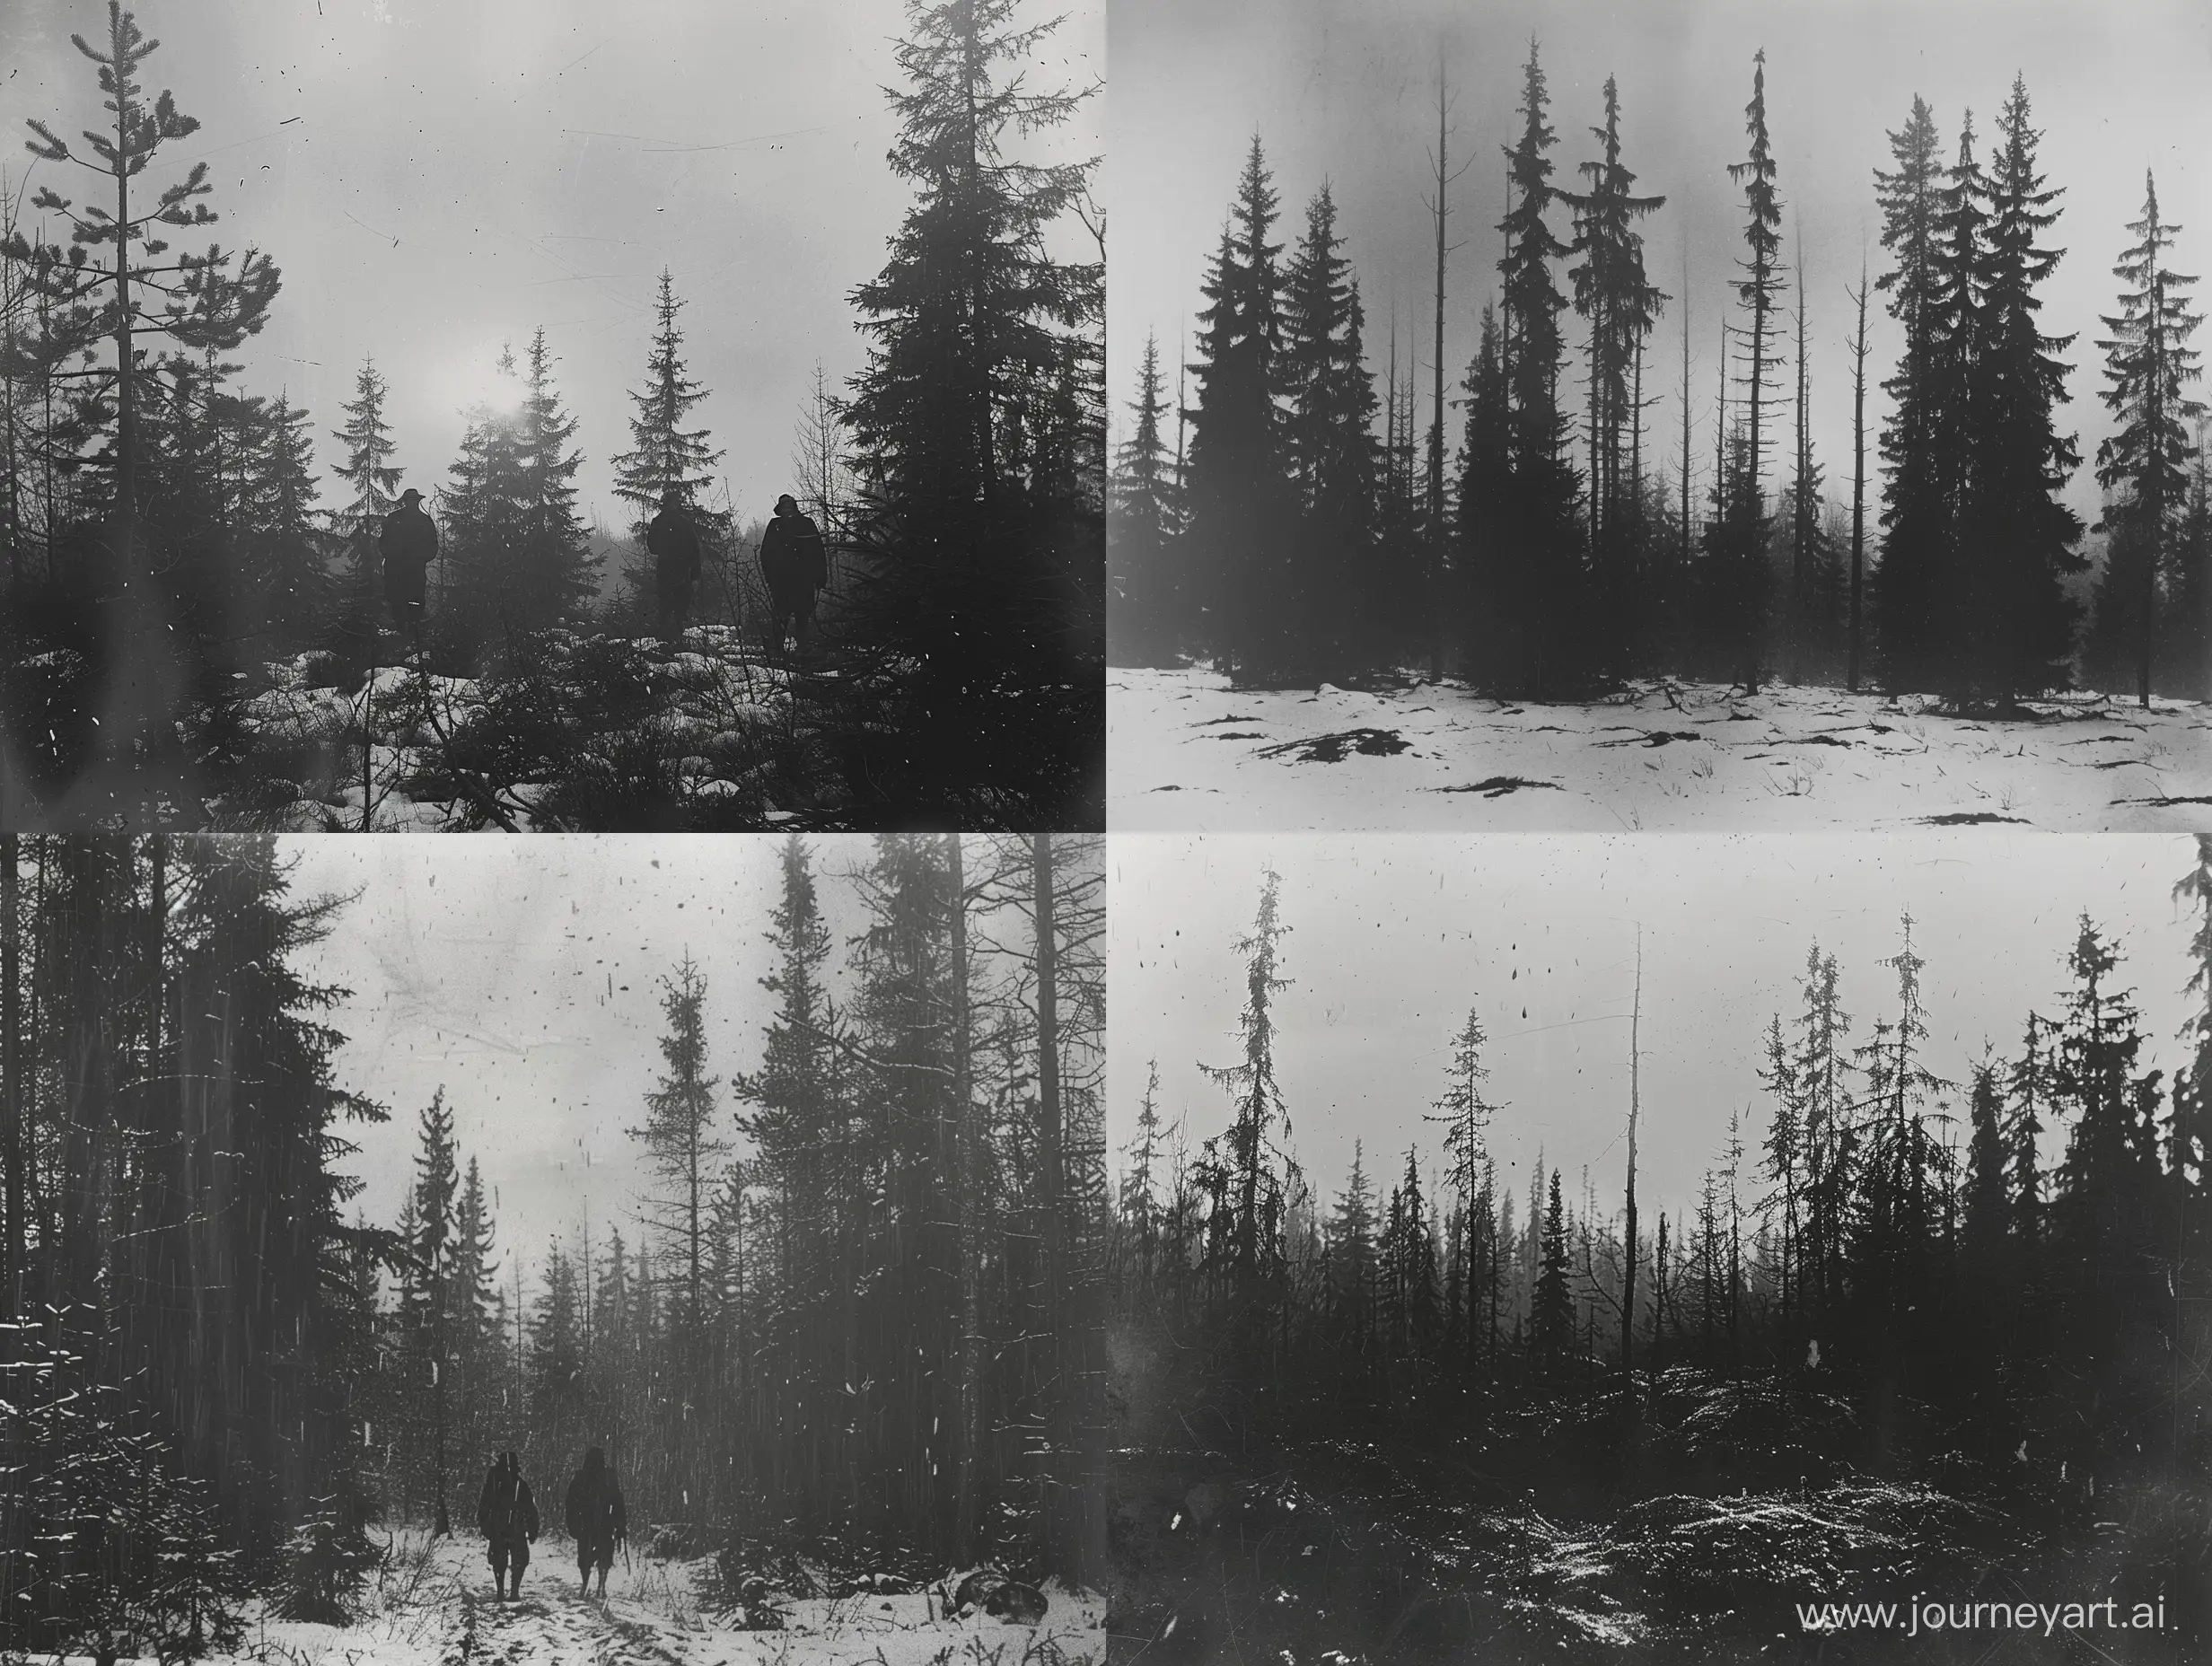 Soviet-Prisoners-of-the-Gulag-Desolate-Confinement-in-the-Northern-Forests